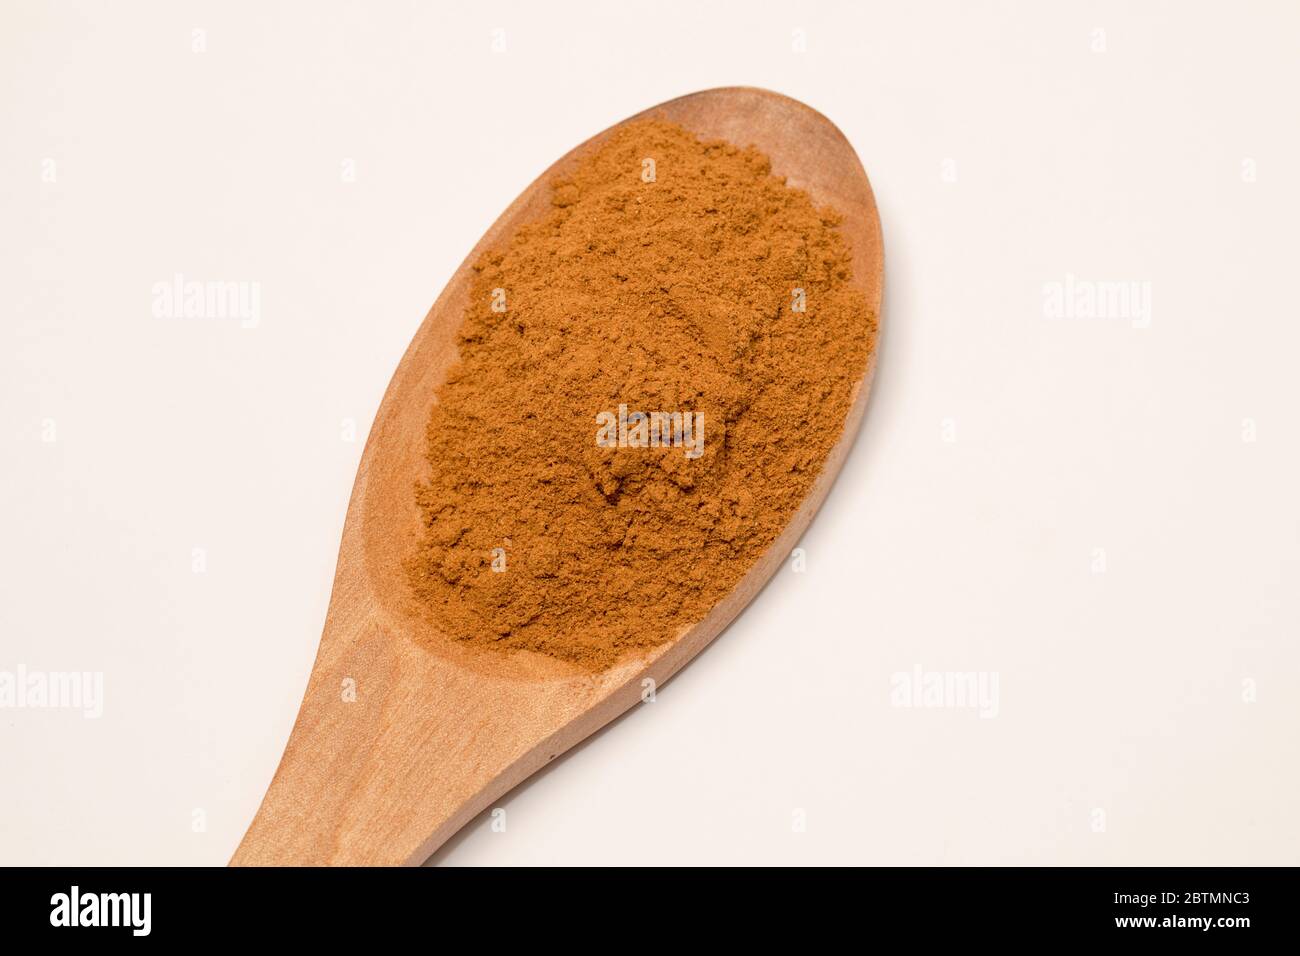 Close-up view of cinnamon powder on white background. Stock Photo